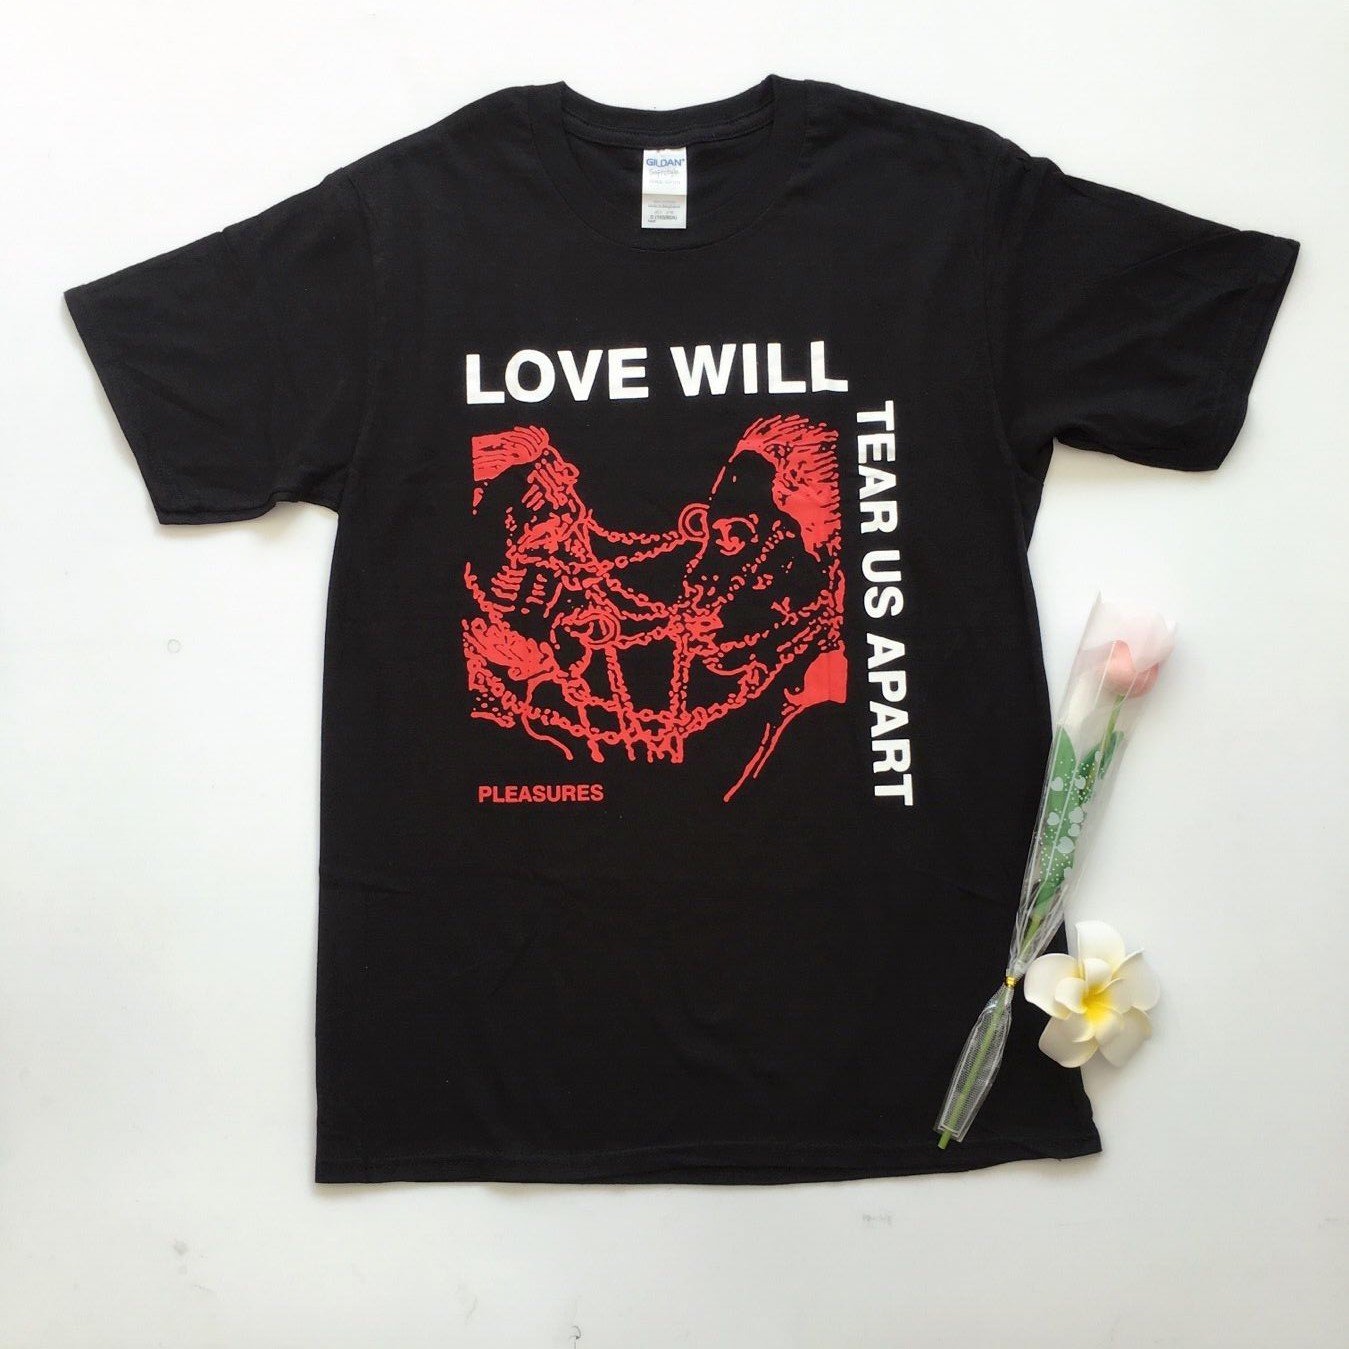 Love Will Tear Us Apart Shirt - Aesthetic Clothing